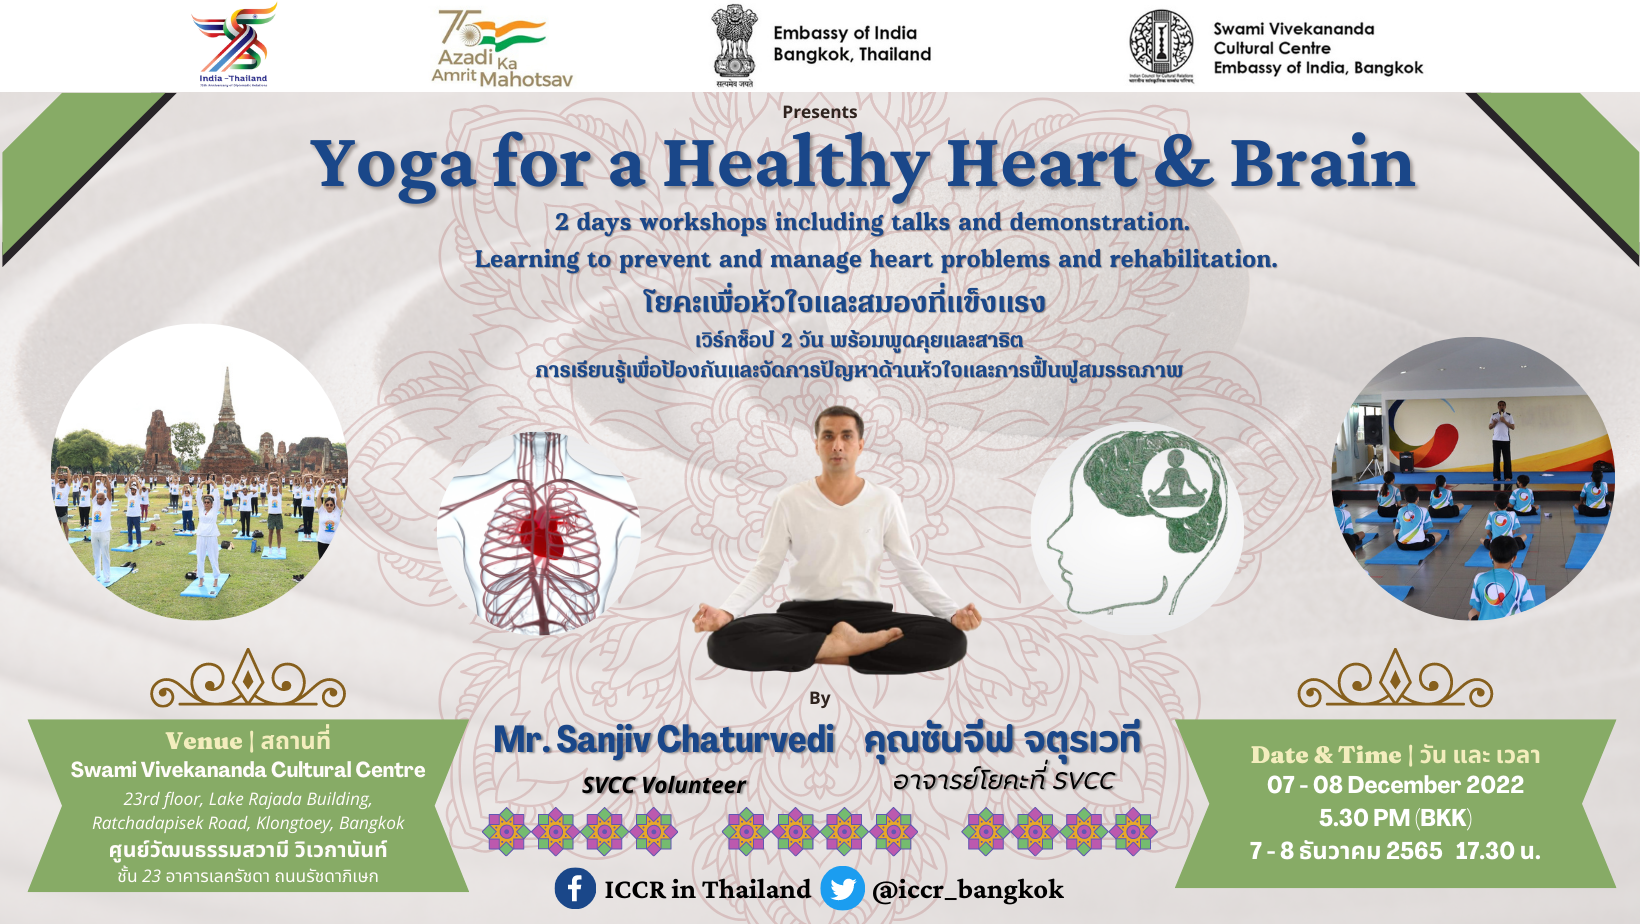 SVCC, Embassy of India Bangkok organized “Swami Vivekananda Cultural Centre, Embassy of India, Bangkok, presents a 2-day workshop on "Yoga for a Healthy Heart and Brain," including talks and demonstrations, by Mr. Sanjiv Chaturvedi, SVCC Volunteer (Yoga),